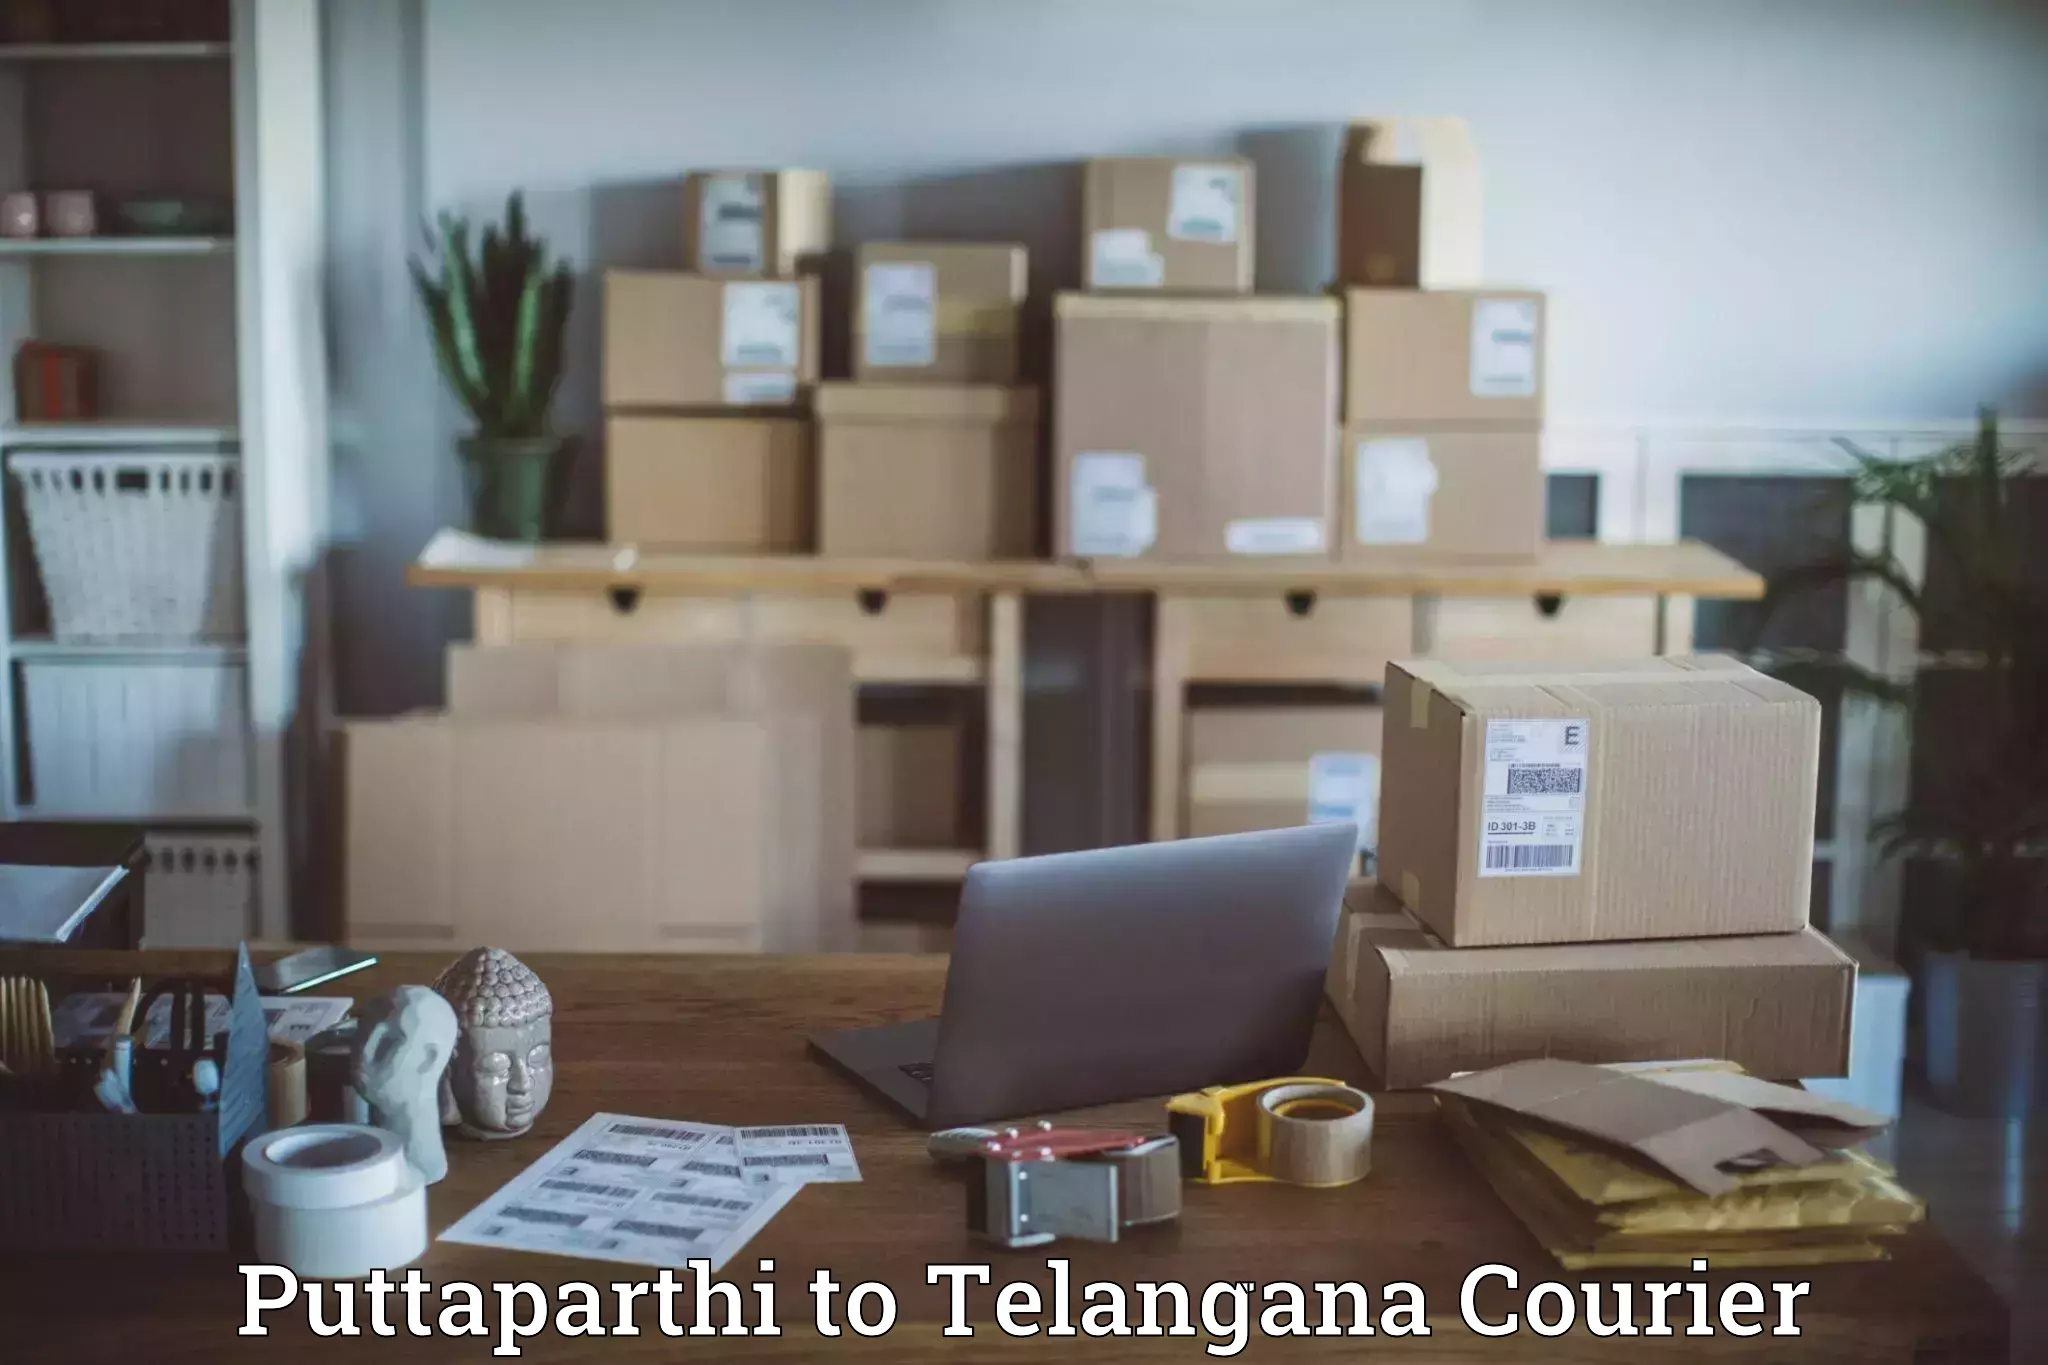 Reliable delivery network Puttaparthi to Vikarabad